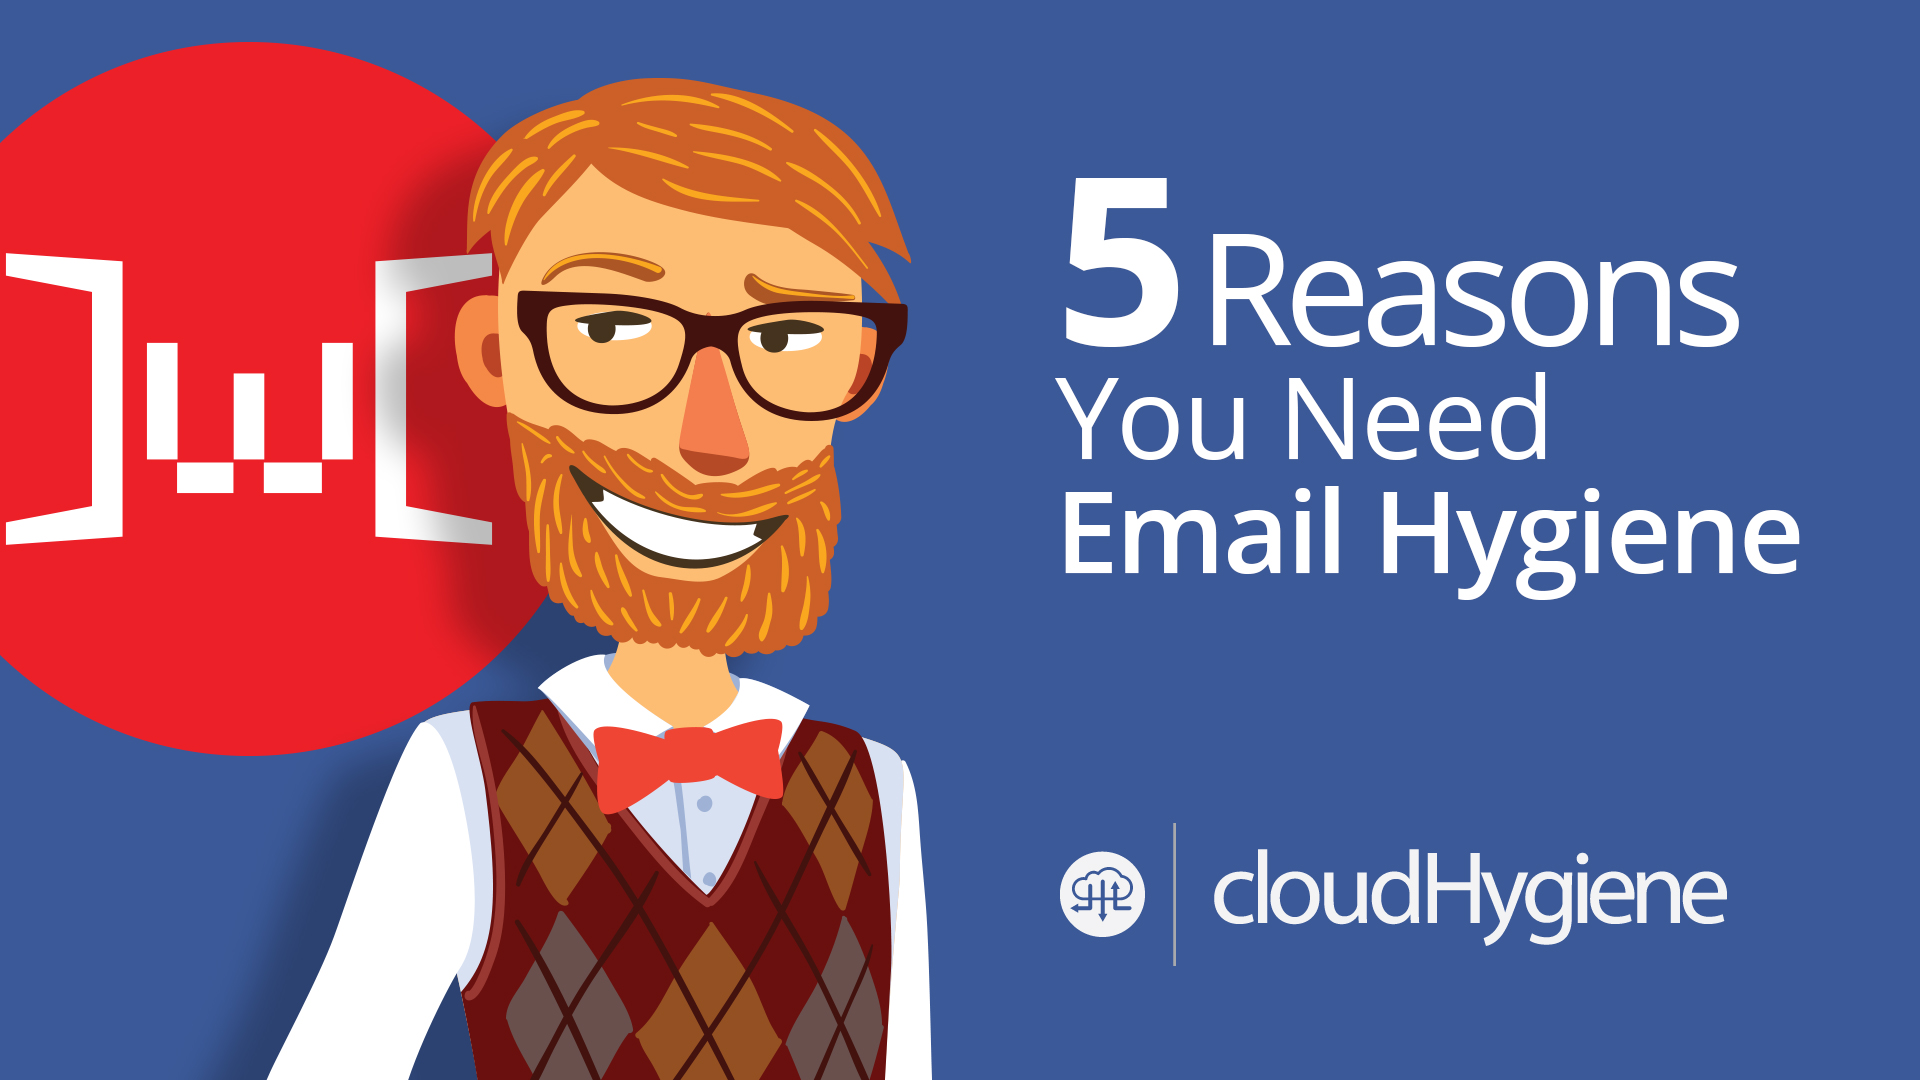 5 Reasons You Need Email Hygiene